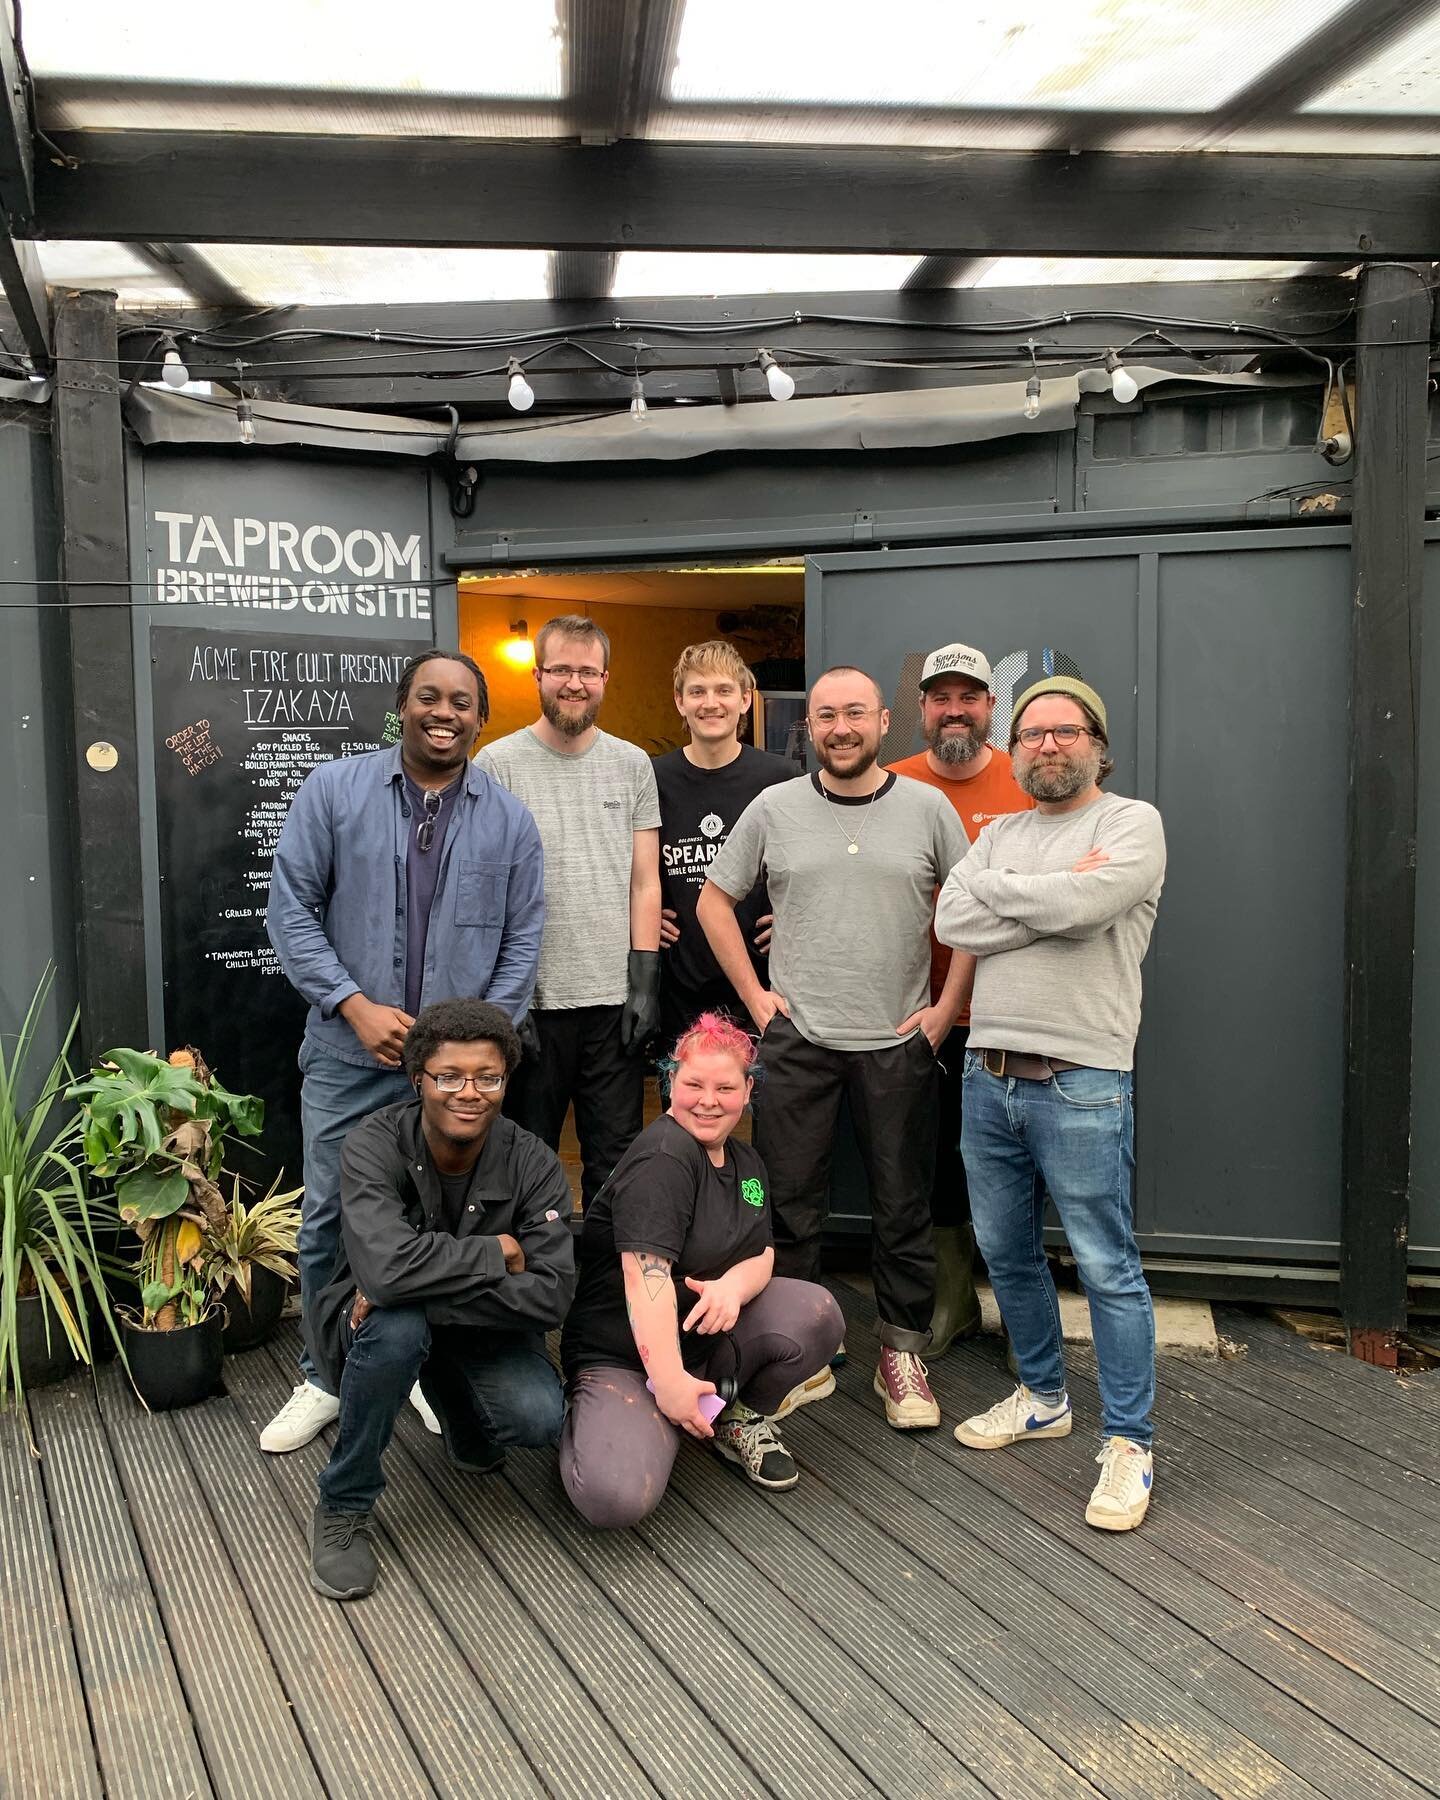 We had a trip down to @40ftbrewery to see the lovely team and have an insight into the amazing beers we serve you lot! We&rsquo;ll be back open as of Thursday so get booked in via @resylondon to try a fresh pint of Disco Pils!